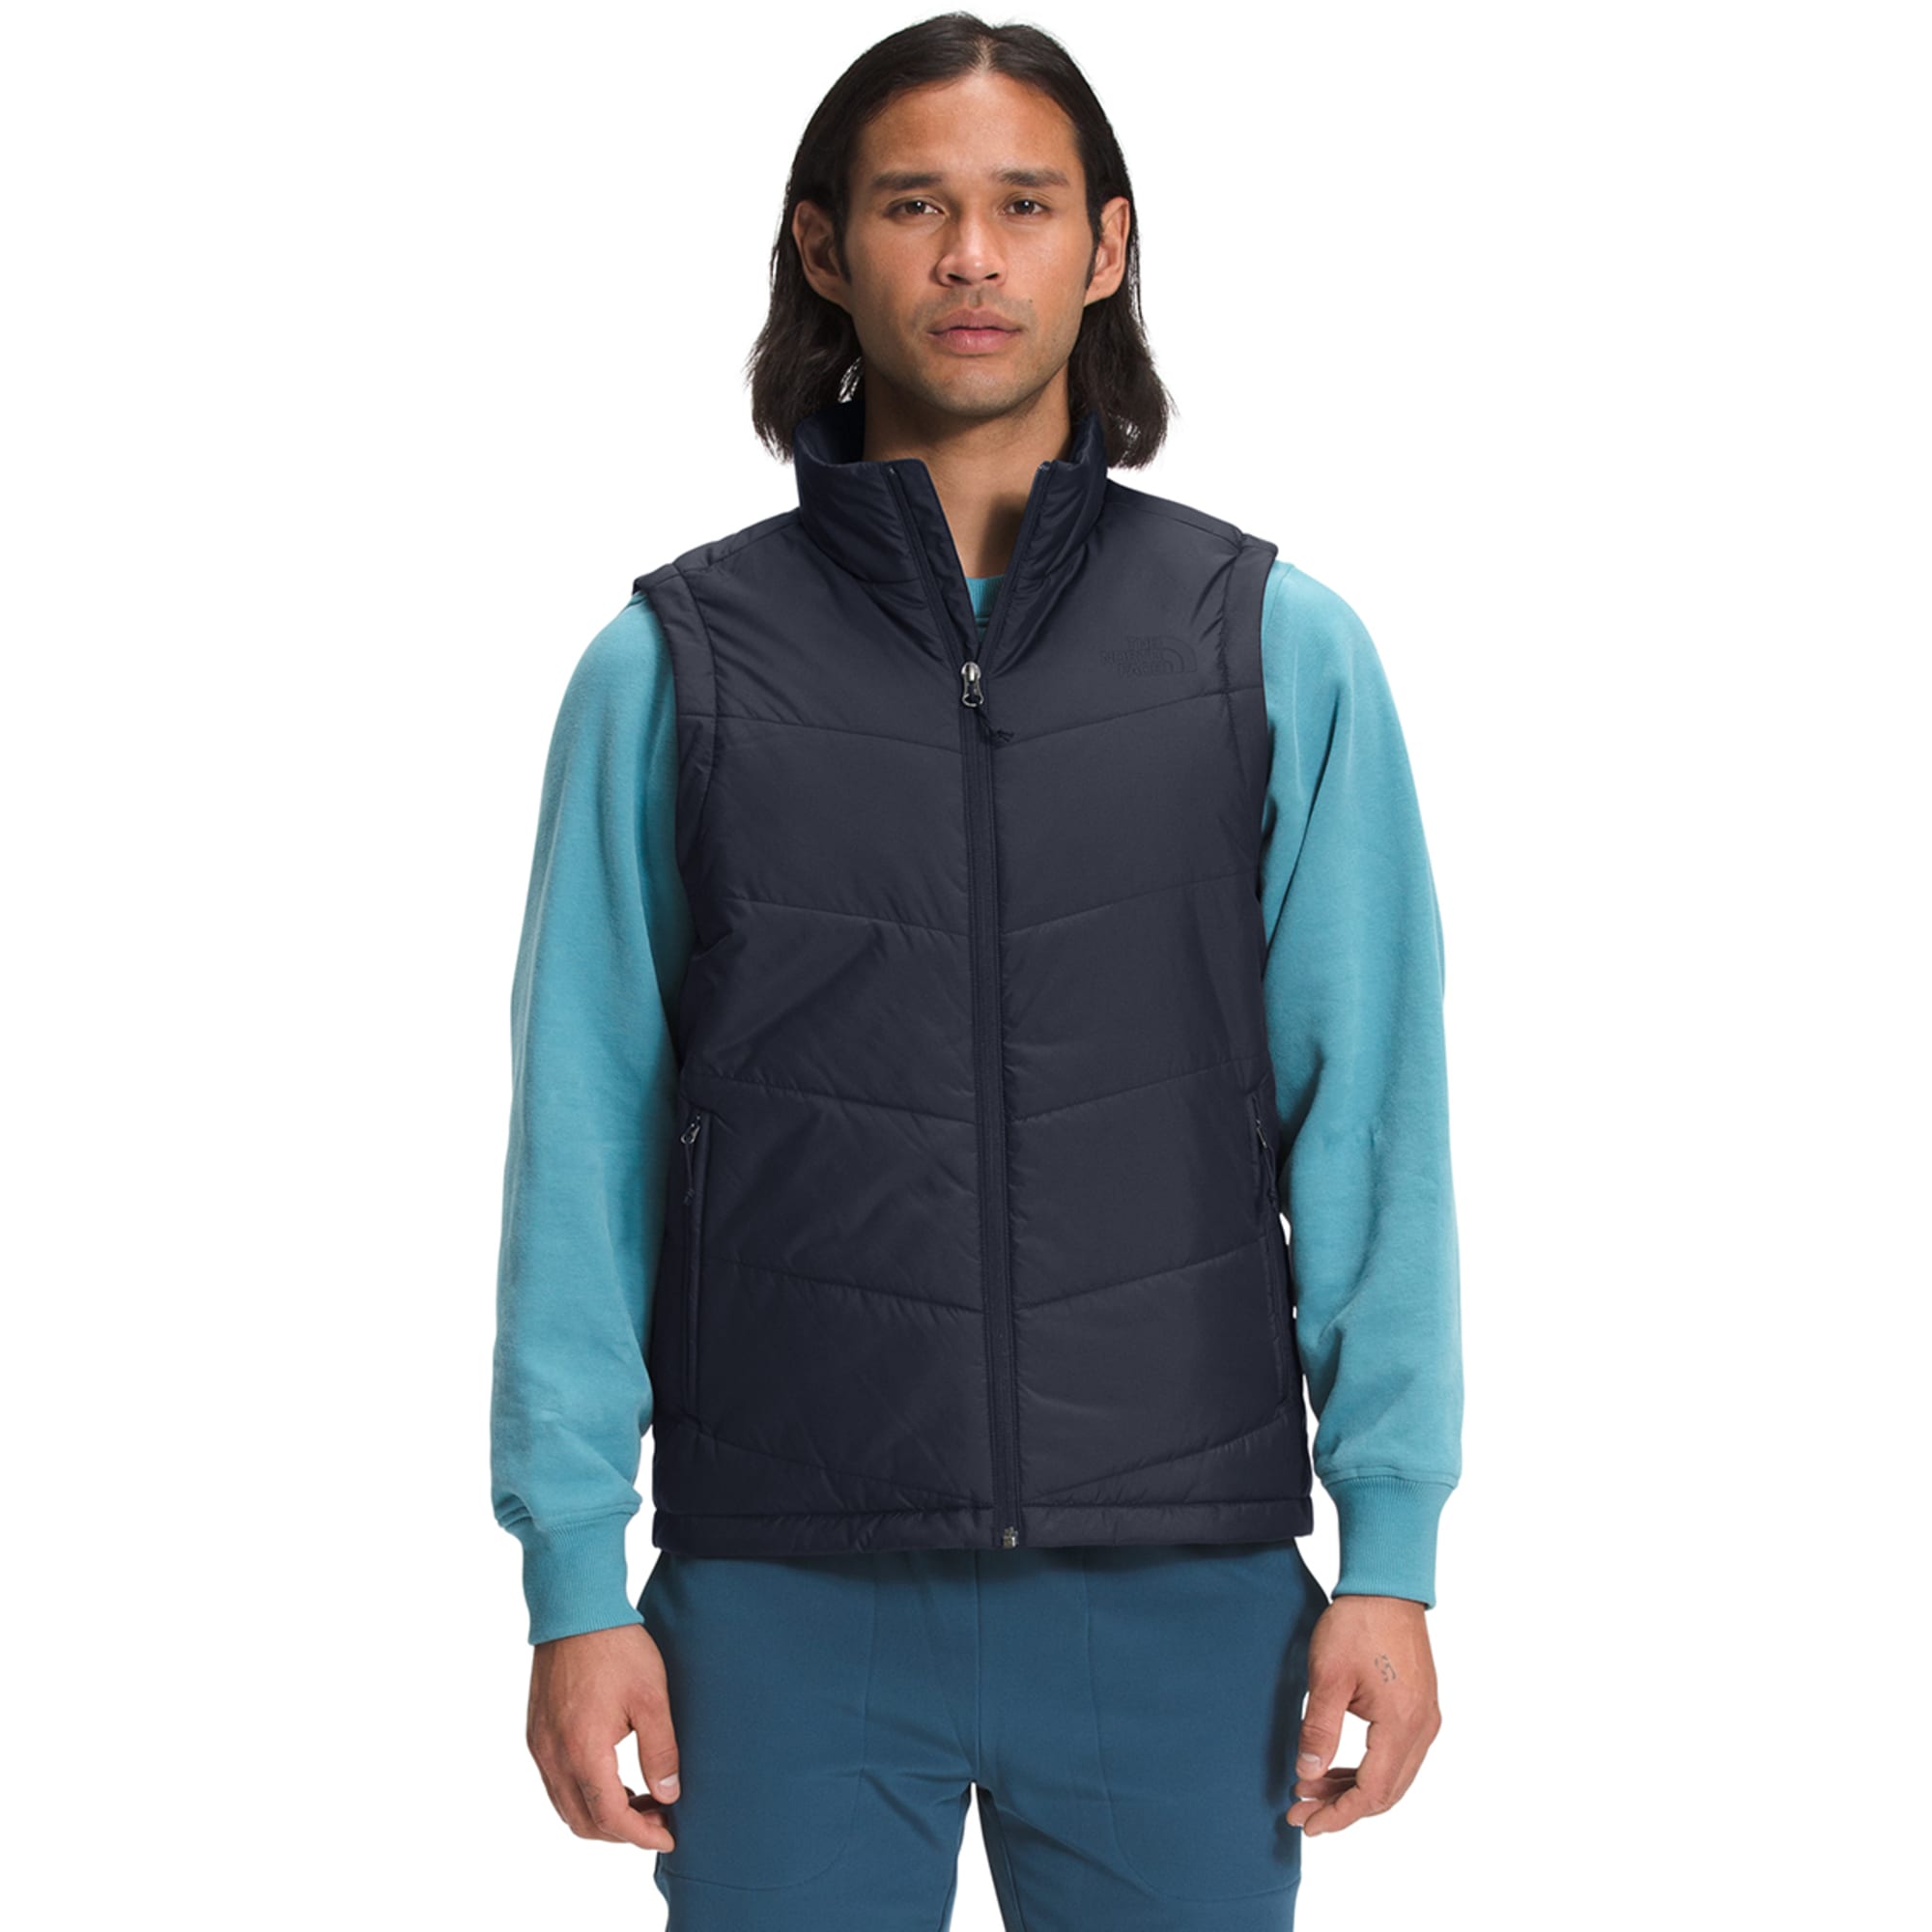 THE NORTH FACE Men’s Junction Insulated Vest